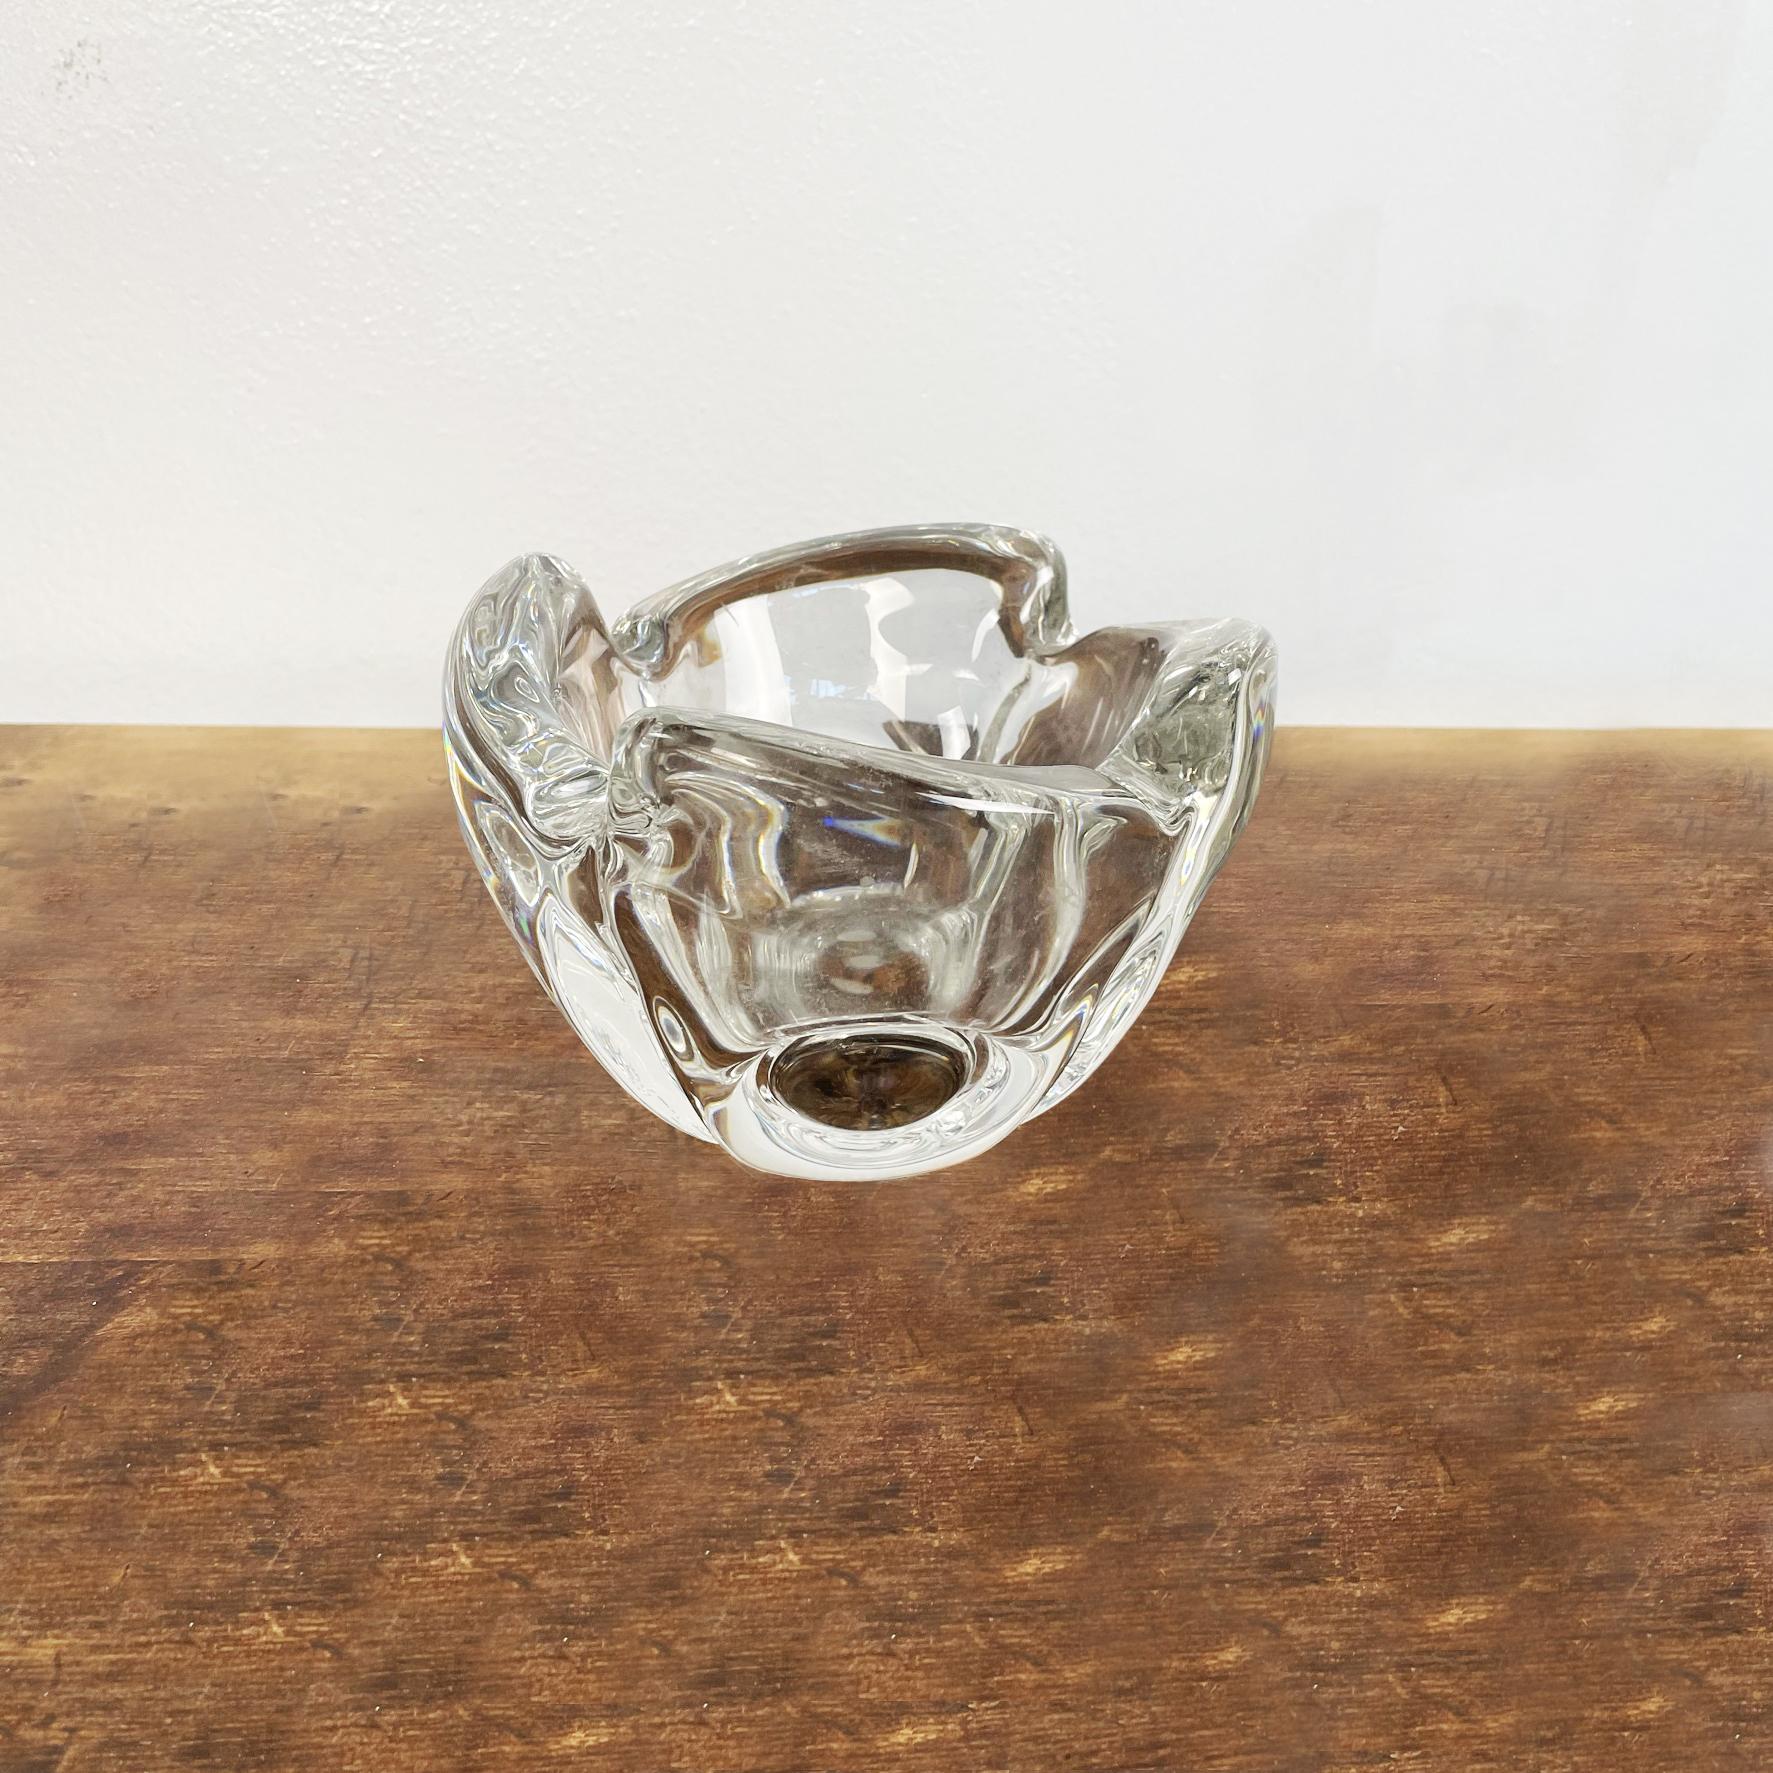 Italian Mid-Century Modern crystal flower shape table ashtray, 1970s.
Table ashtray with round crystal base. The structure resembles a four-petal flower, with a circle in the middle.
This ashtray is very collectable glass Murano Italy, perfect in